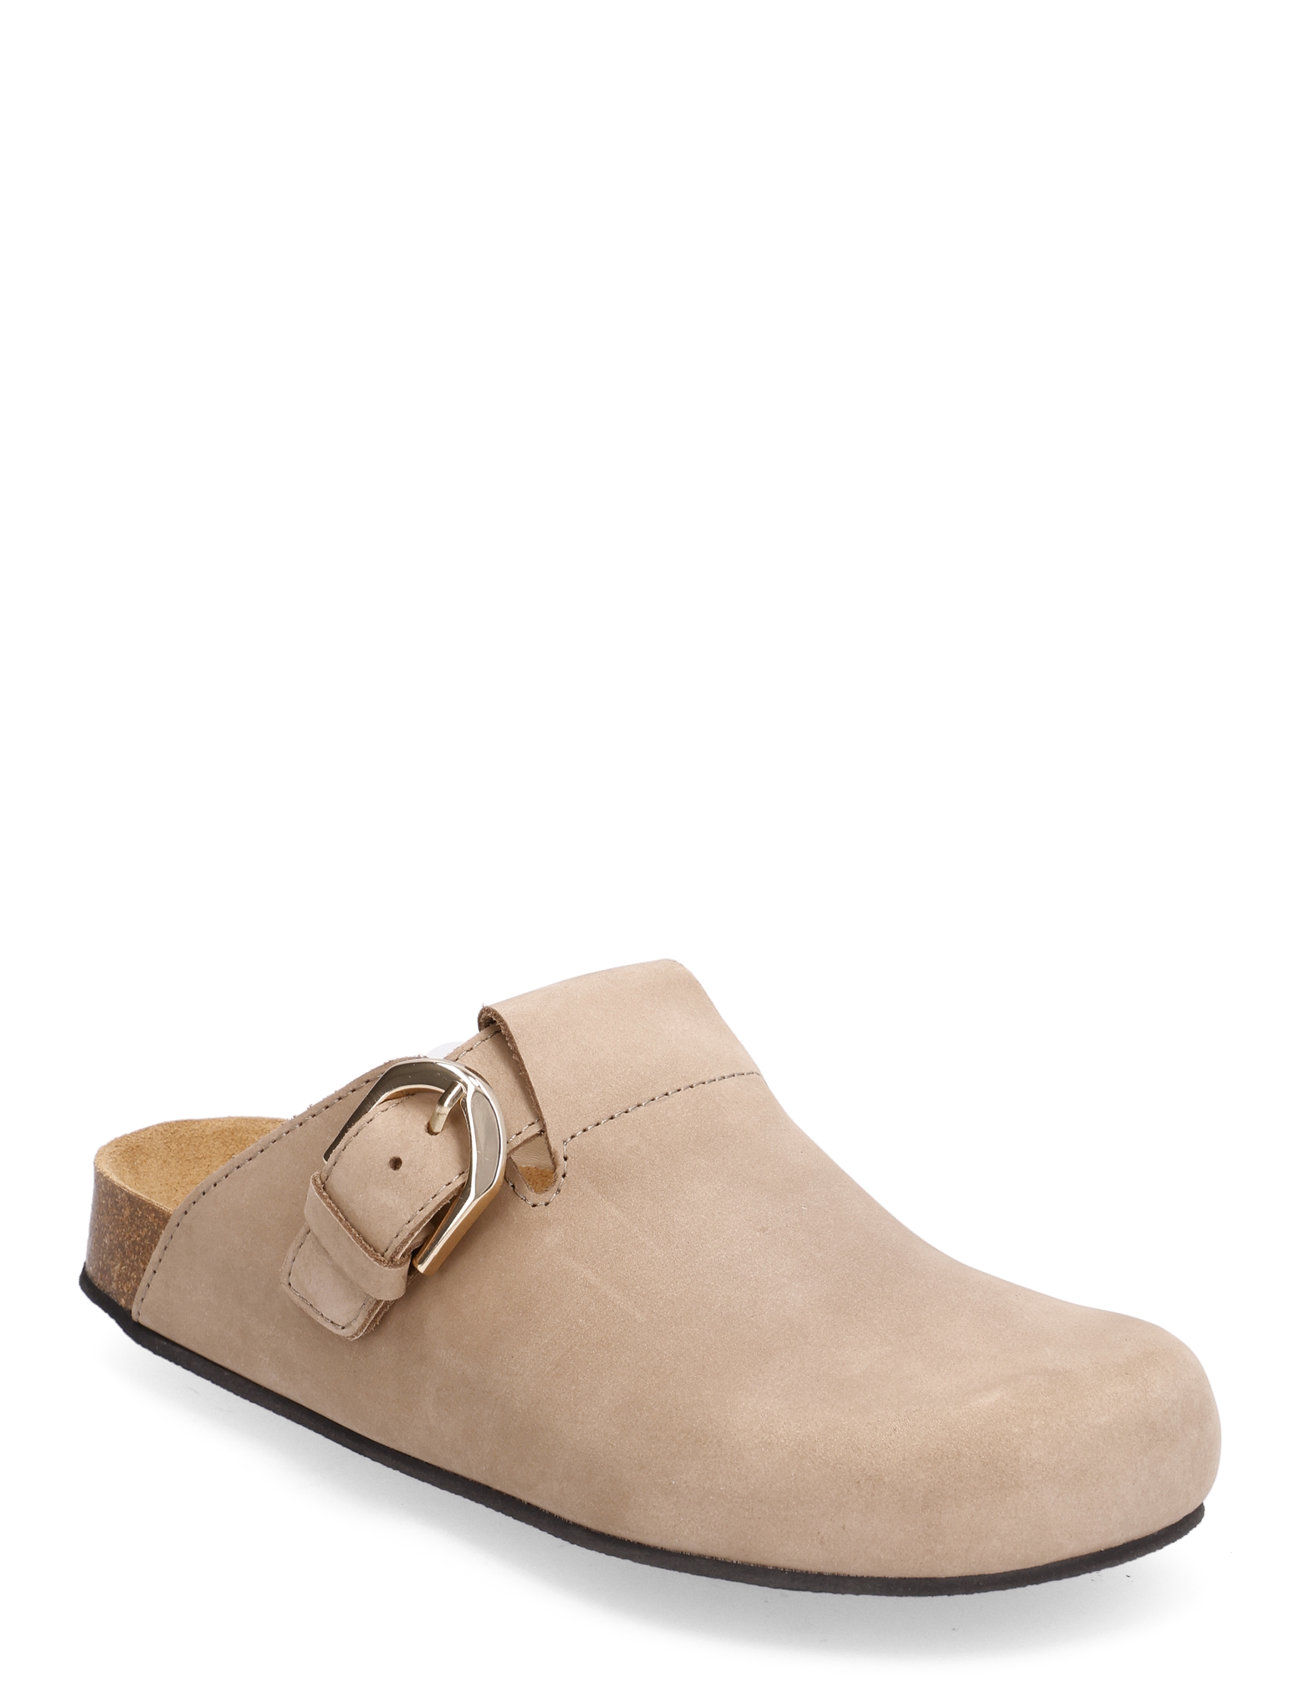 Travis Grey Leather Mules Shoes Mules & Slip-ins Flat Mules Beige ALOHAS